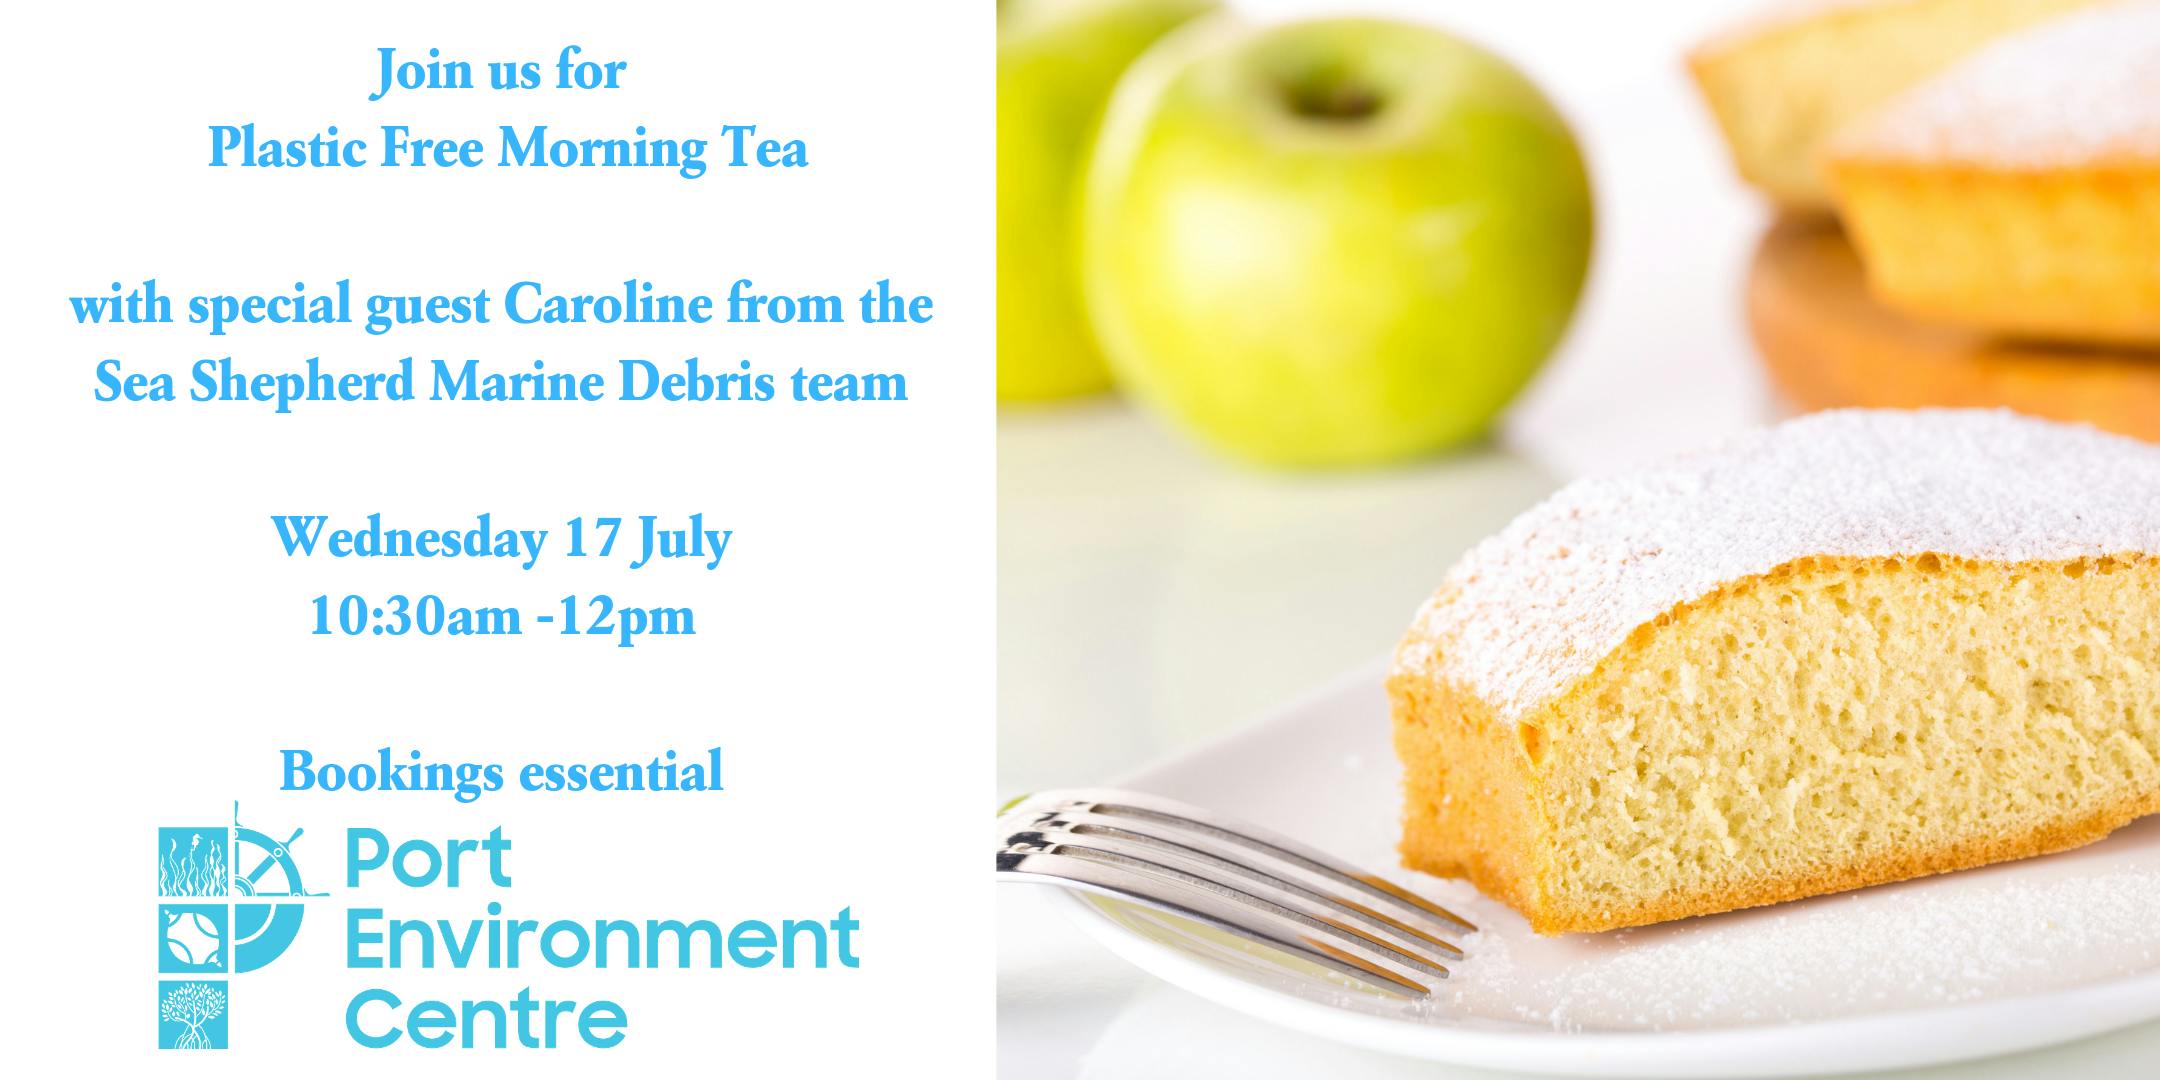 Plastic Free Morning Tea at the Port Environment Centre